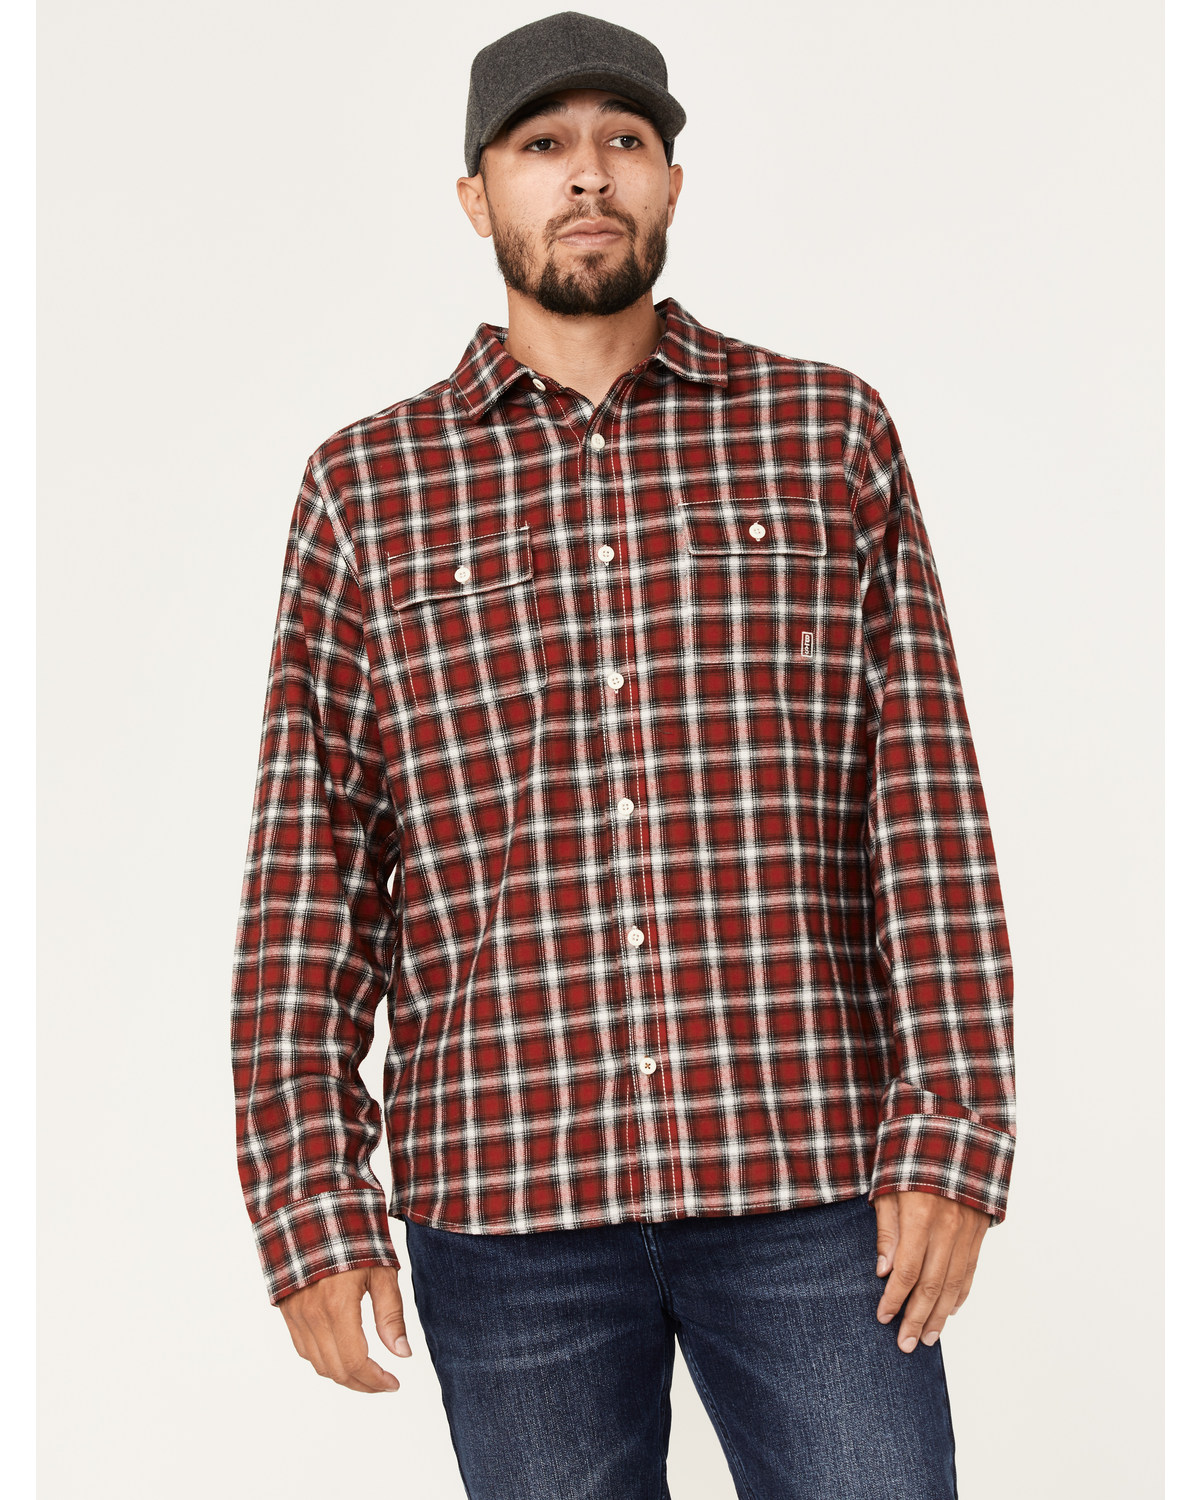 Brothers and Sons Men's Everyday Plaid Long Sleeve Button Down Western Flannel Shirt